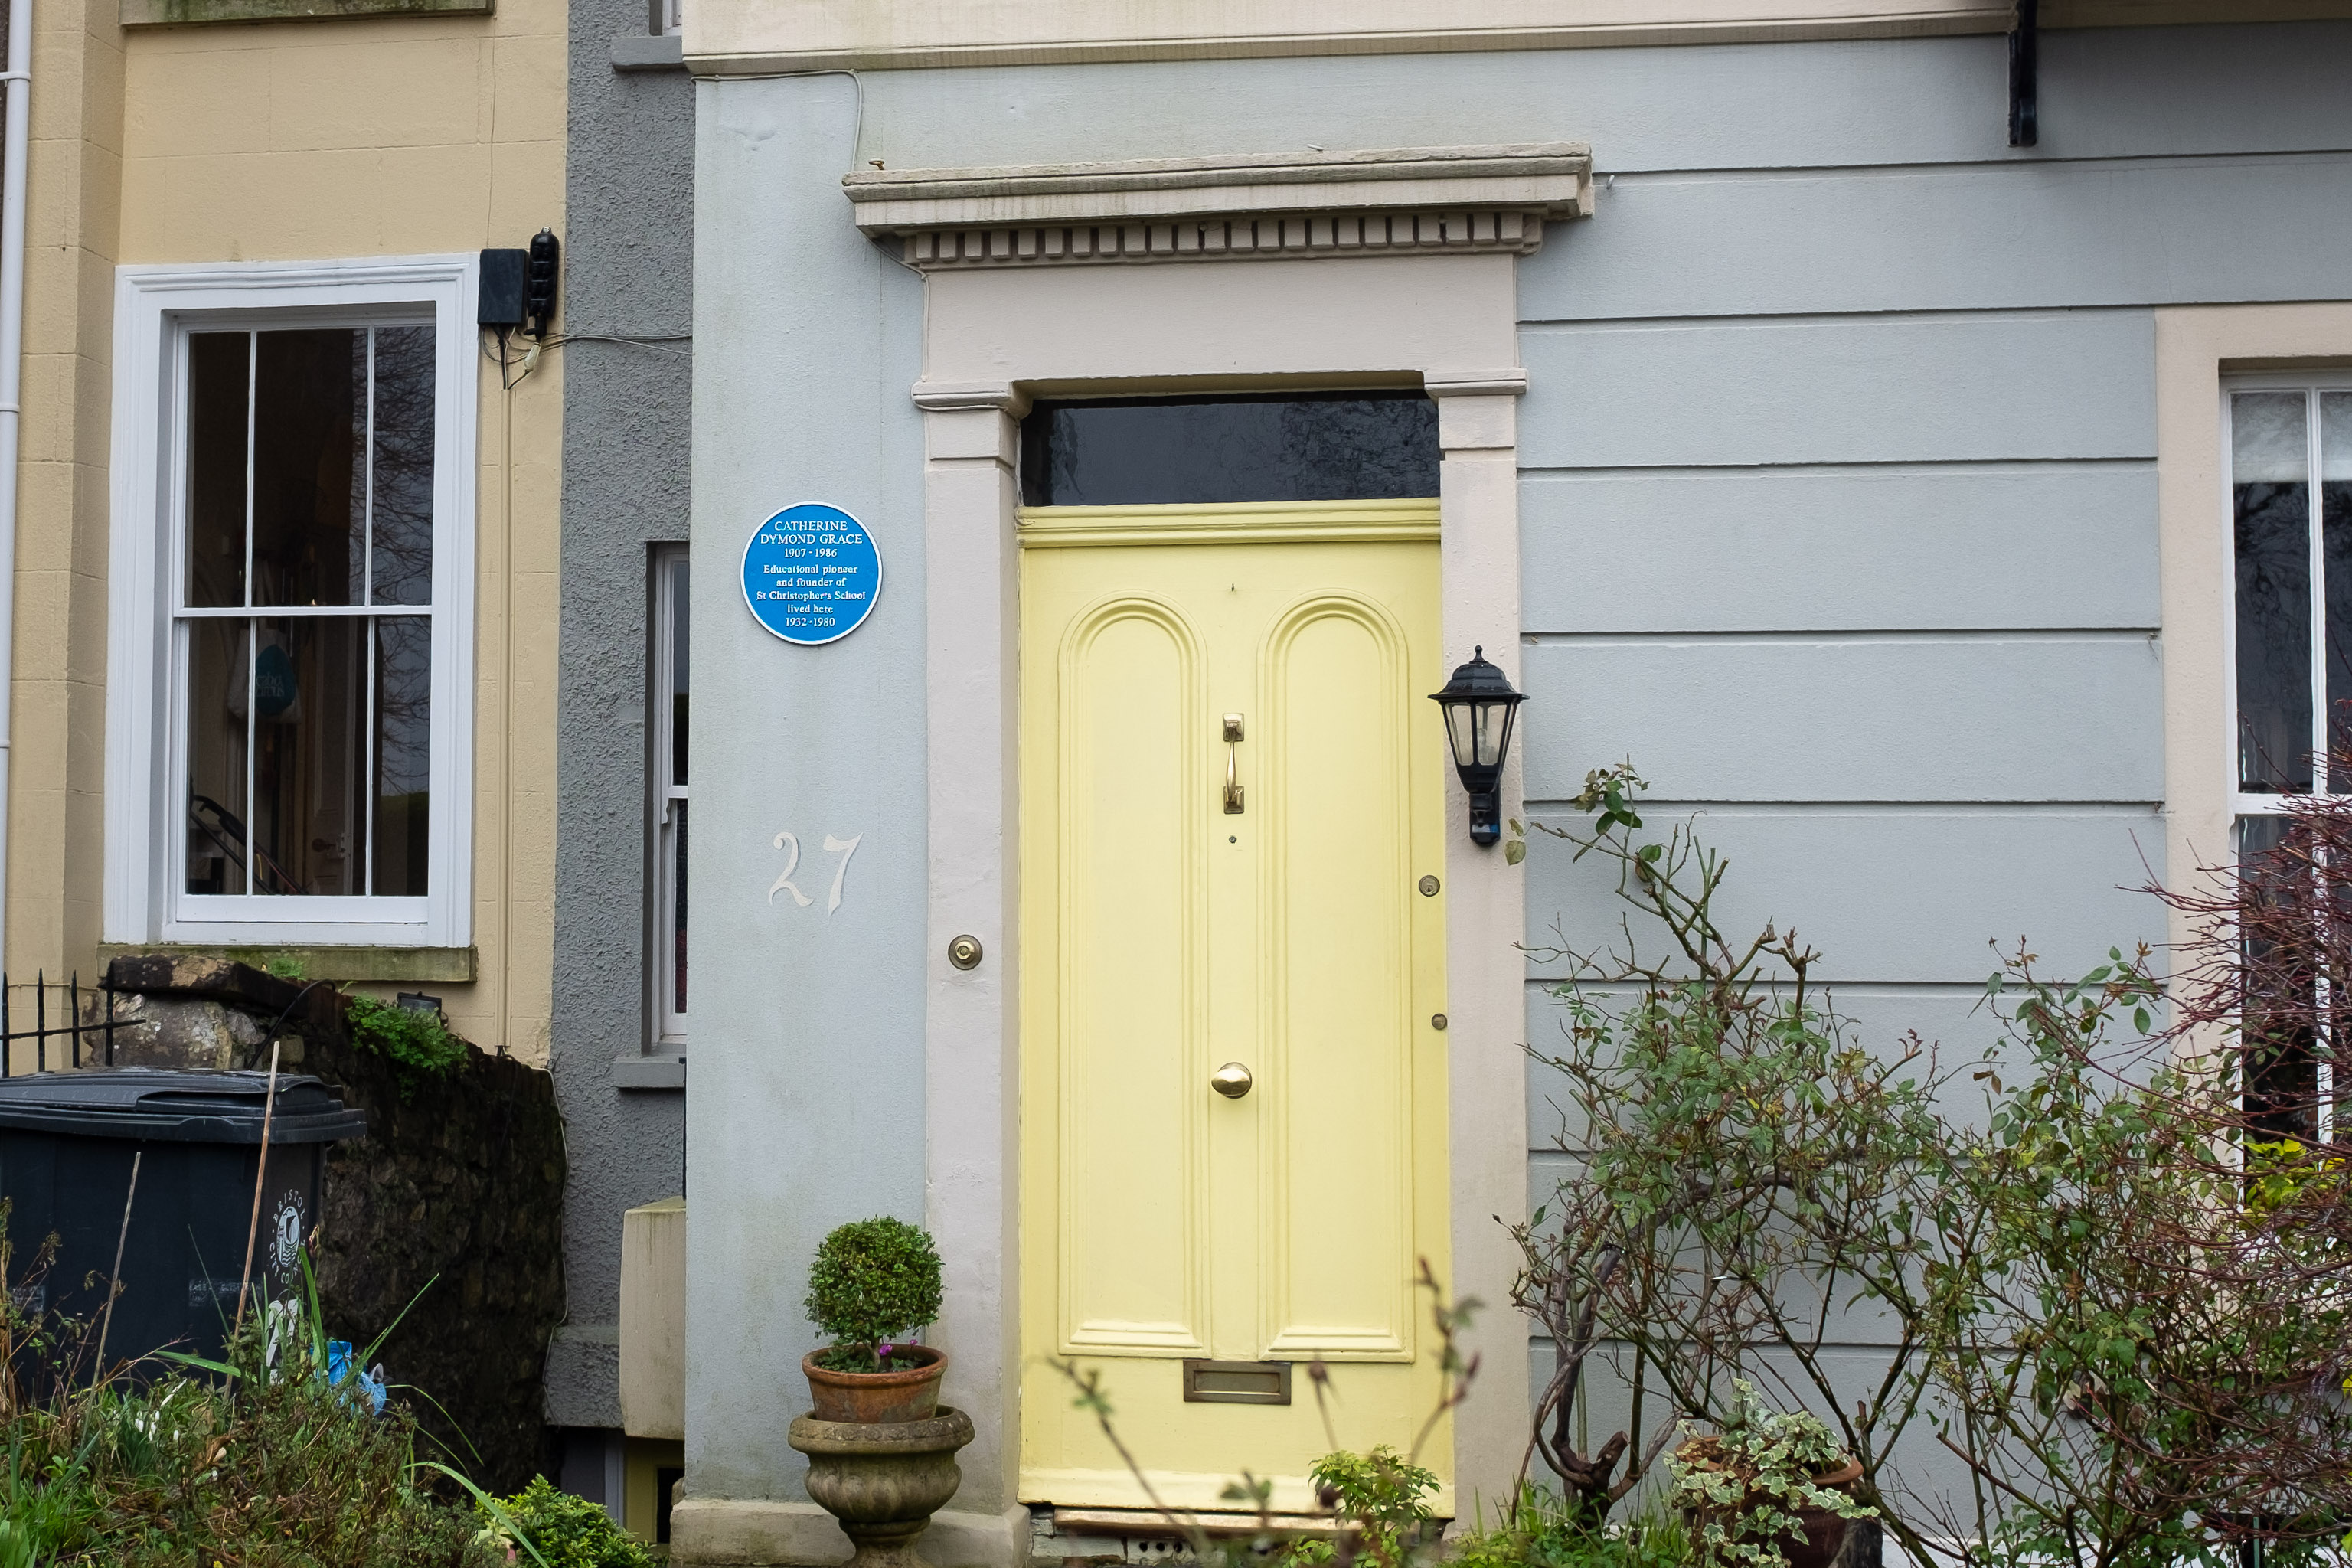 Catherine Dymond Grace
Can't throw a bun in Clifton without hitting a blue plaque. This one's to Catherine Dymond Grace, educational pioneer.
